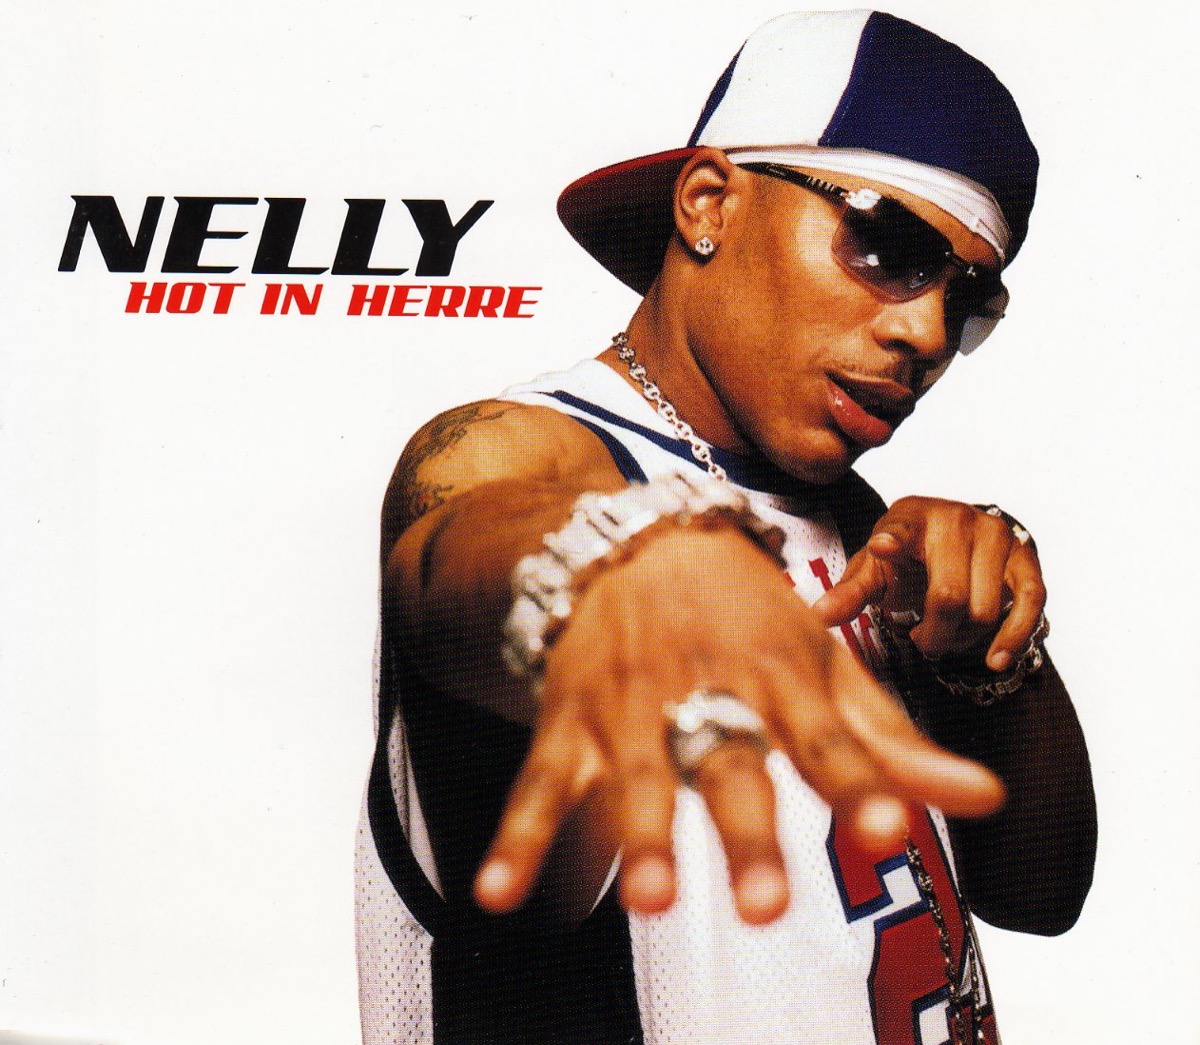 Nelly "Hot in Herre" single cover